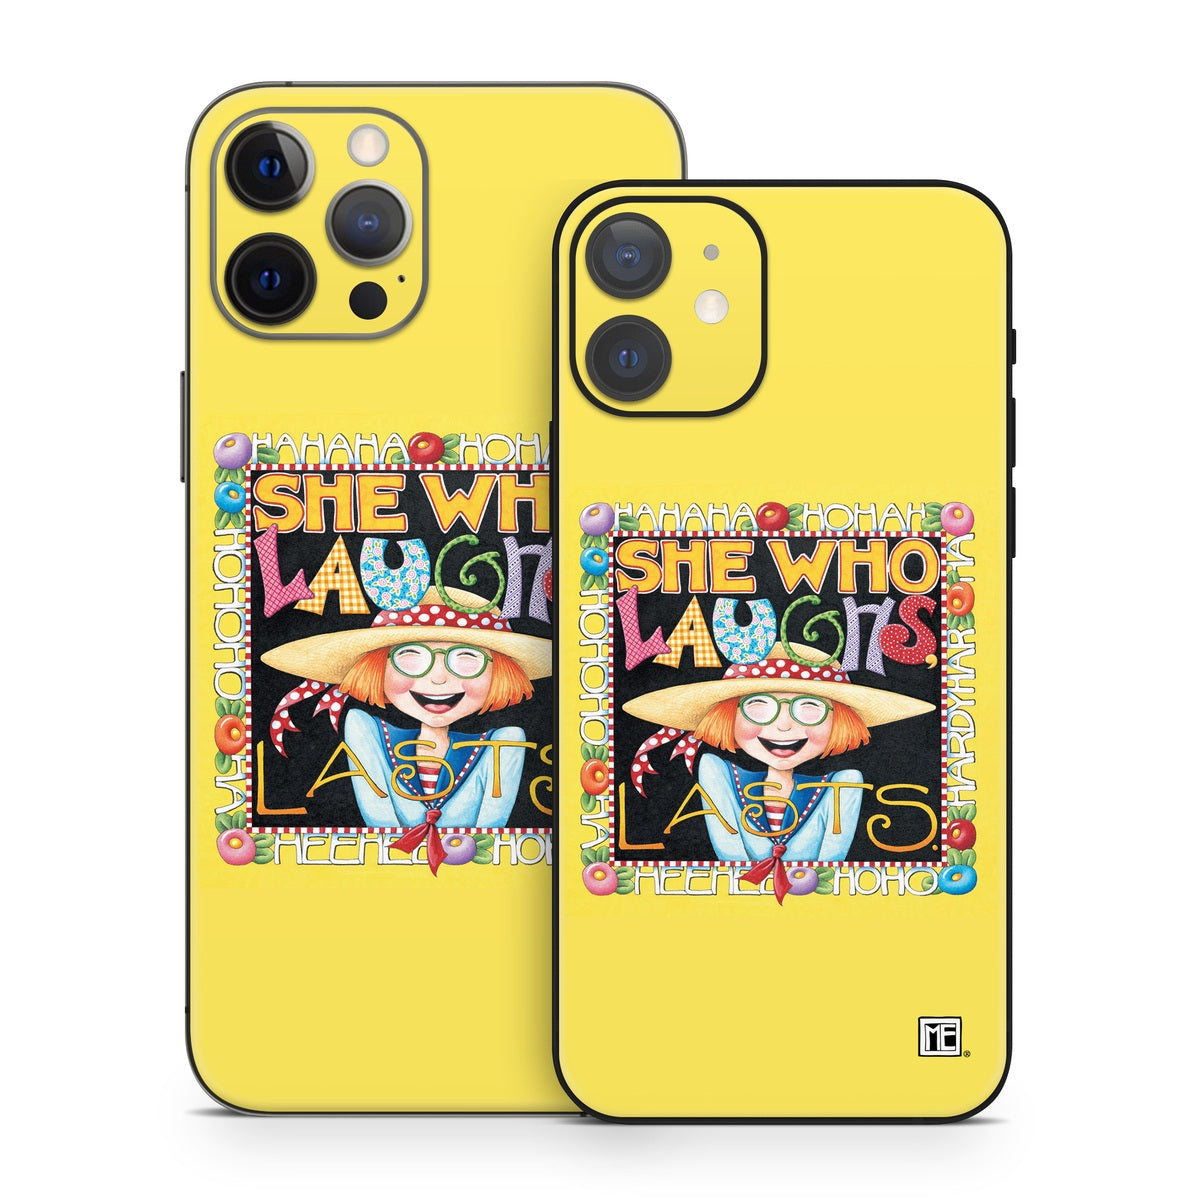 She Who Laughs - Apple iPhone 12 Skin